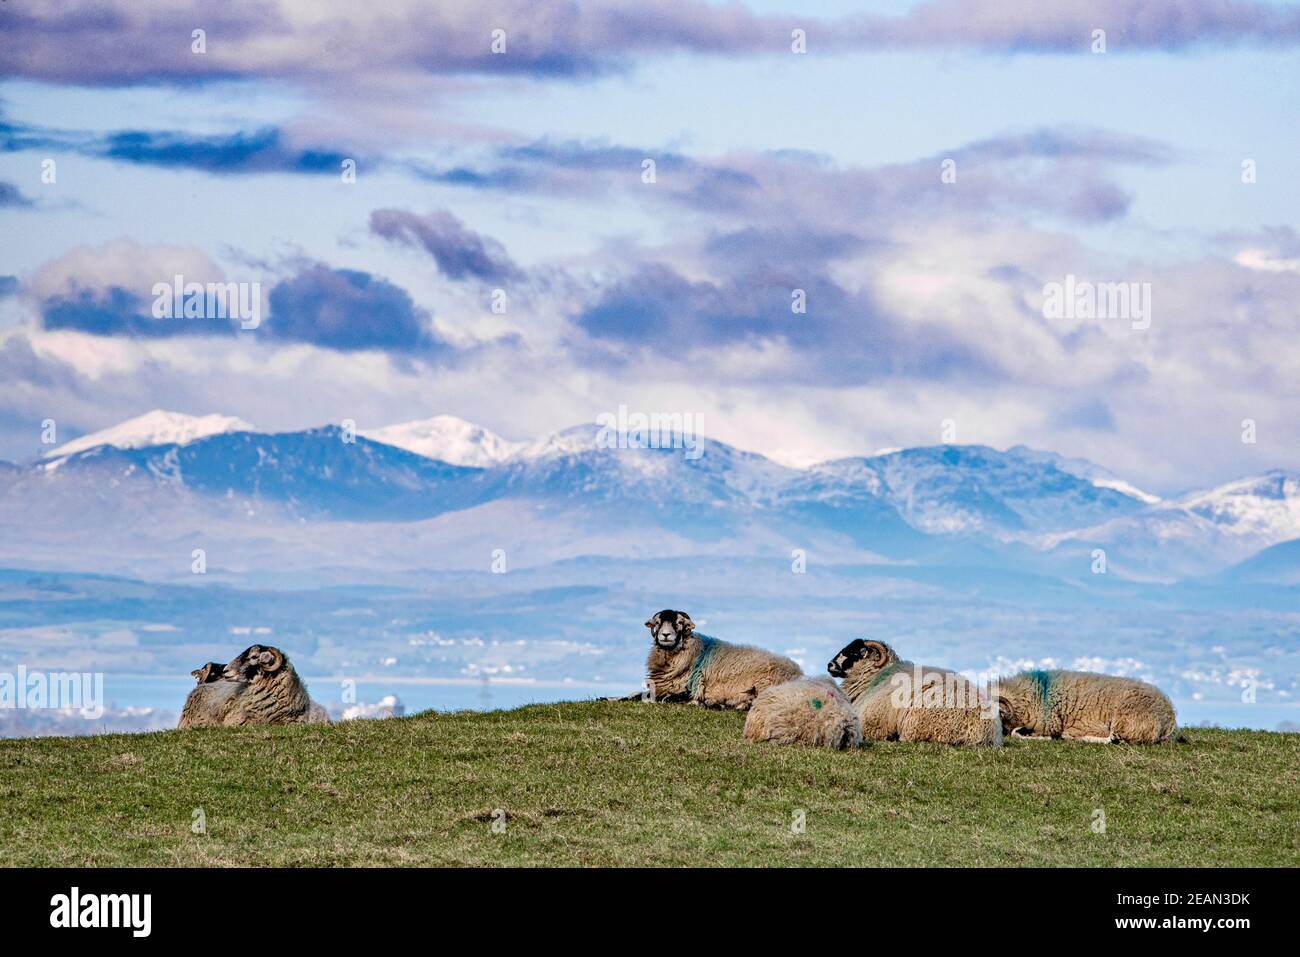 Lancaster, Lancashire, UK. 10th Feb, 2021. Swaledale sheep near Lancaster, Lancashire with the snow topped fells of the Lake District, Cumbria on a cold day where the temperature struggled to reach higher than freezing. Credit: John Eveson/Alamy Live News Stock Photo